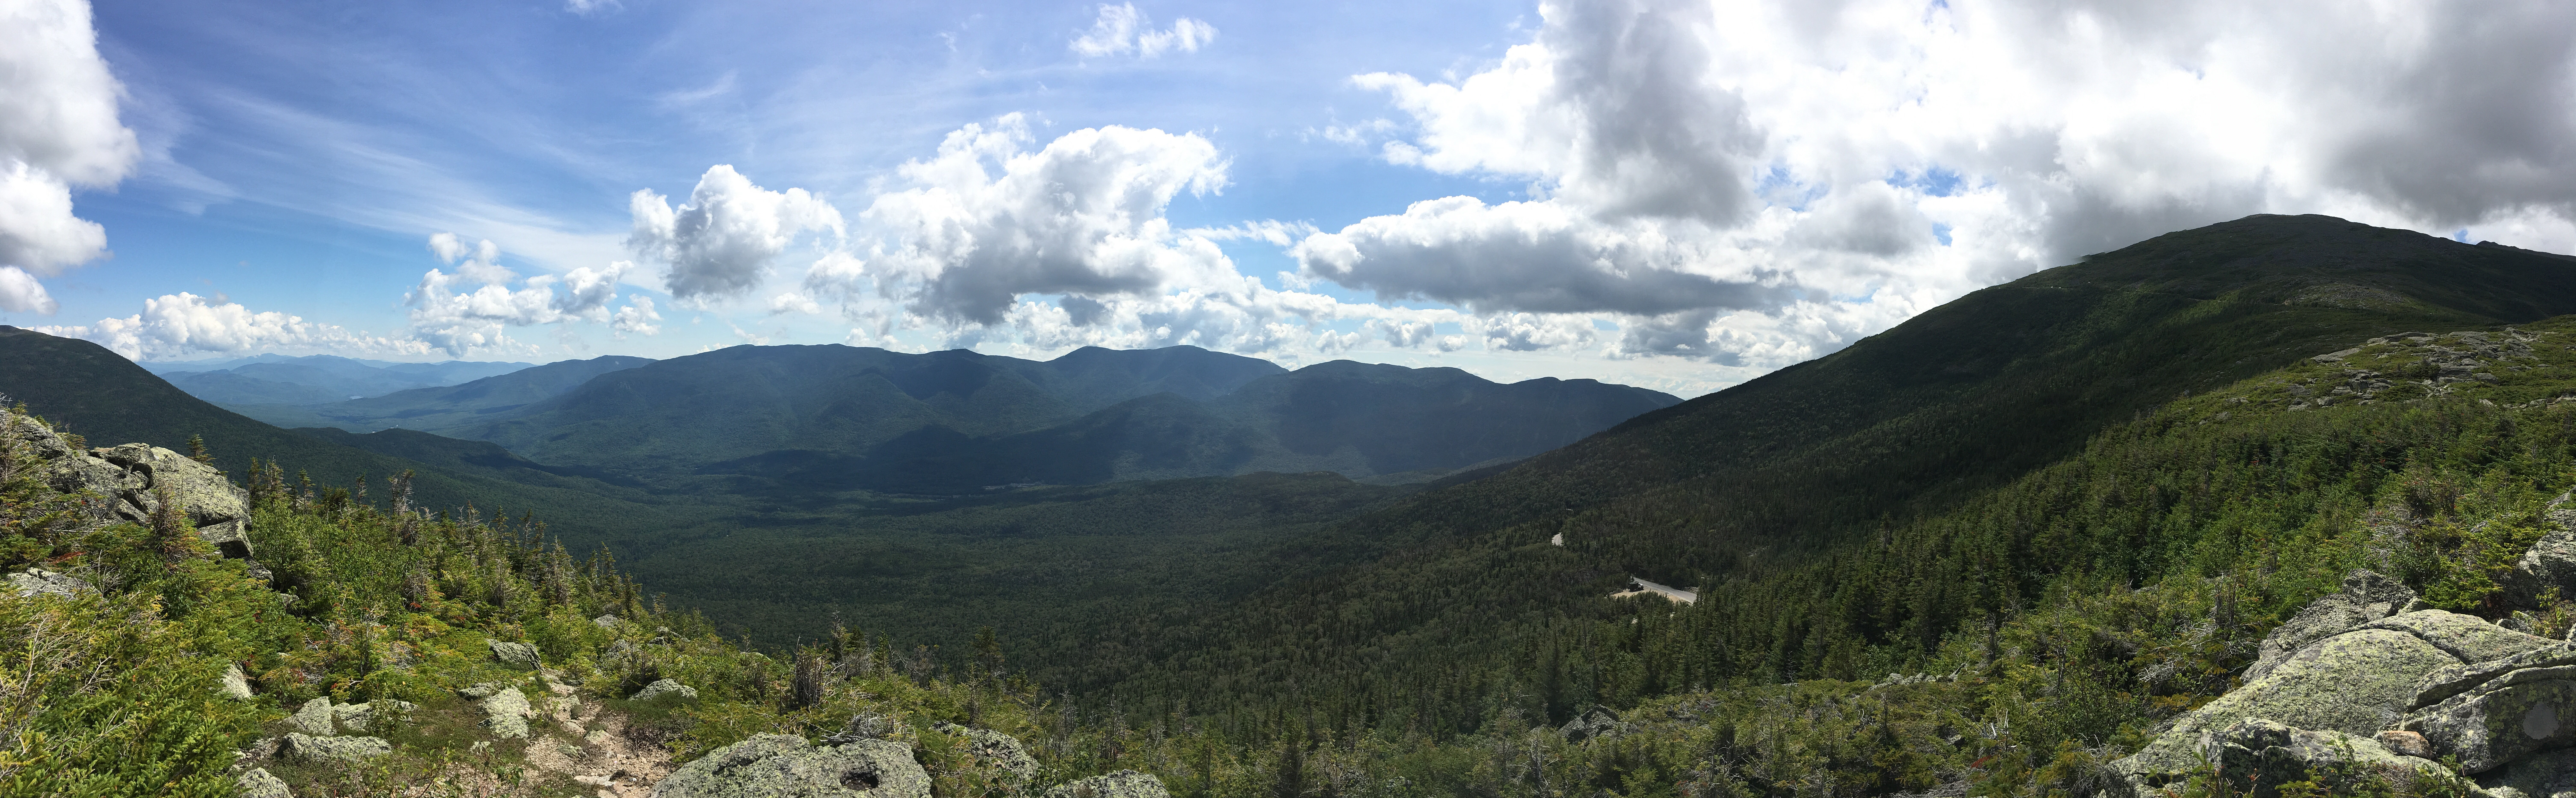 View from Mt Washington
